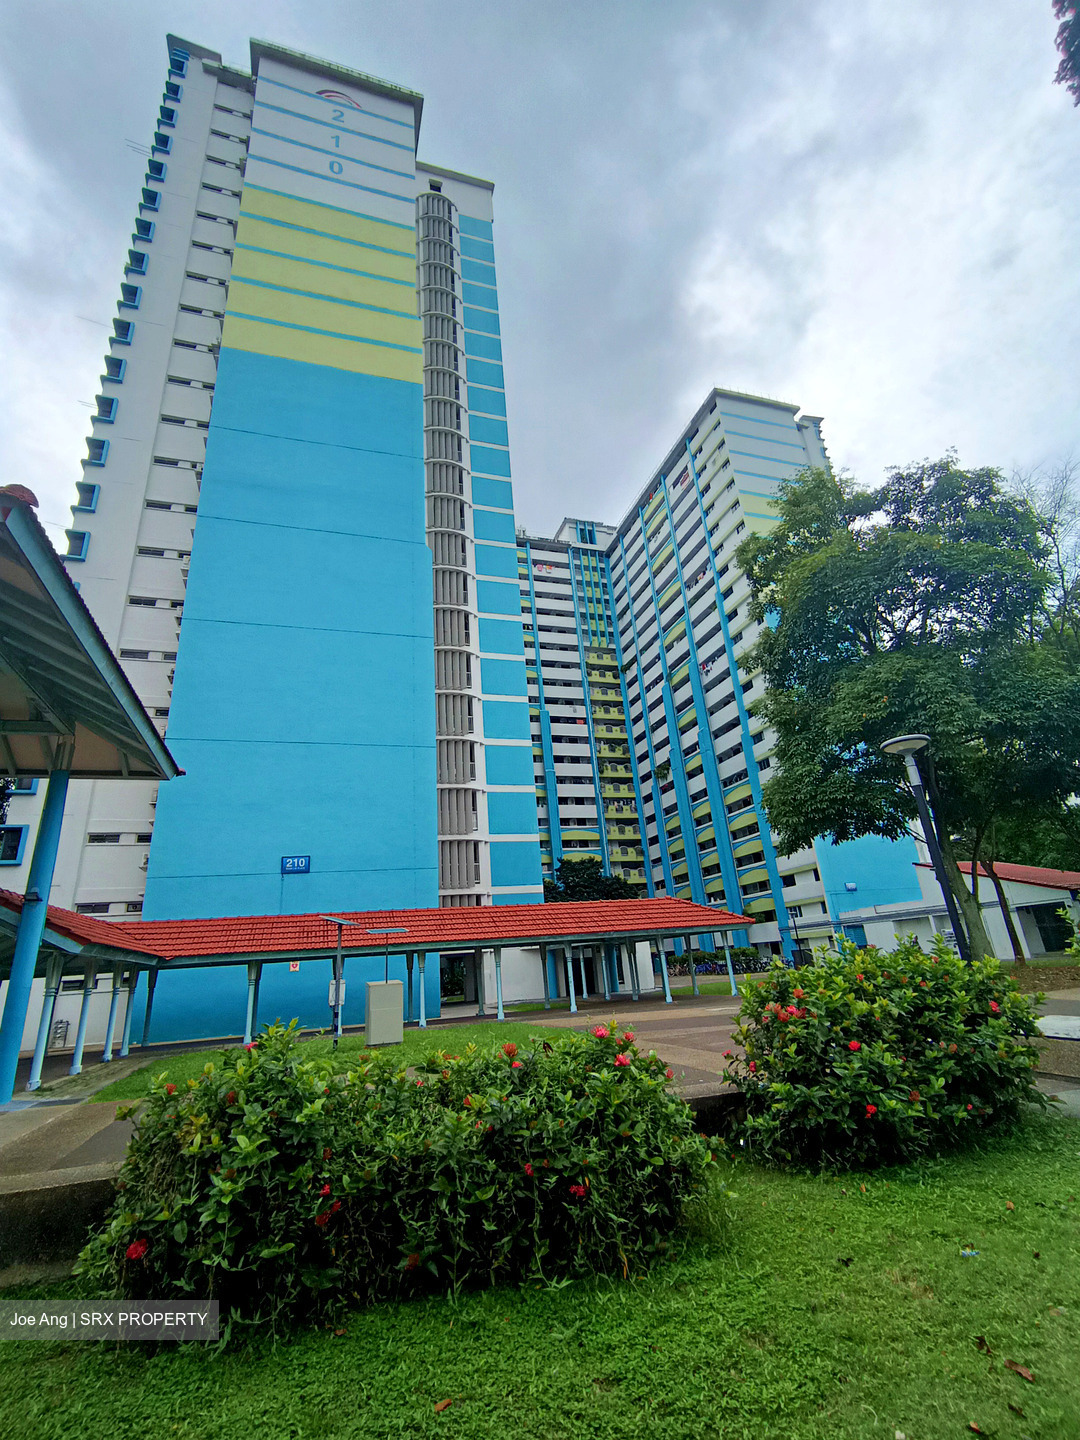 Boon Lay Place (Jurong West),  #428583421